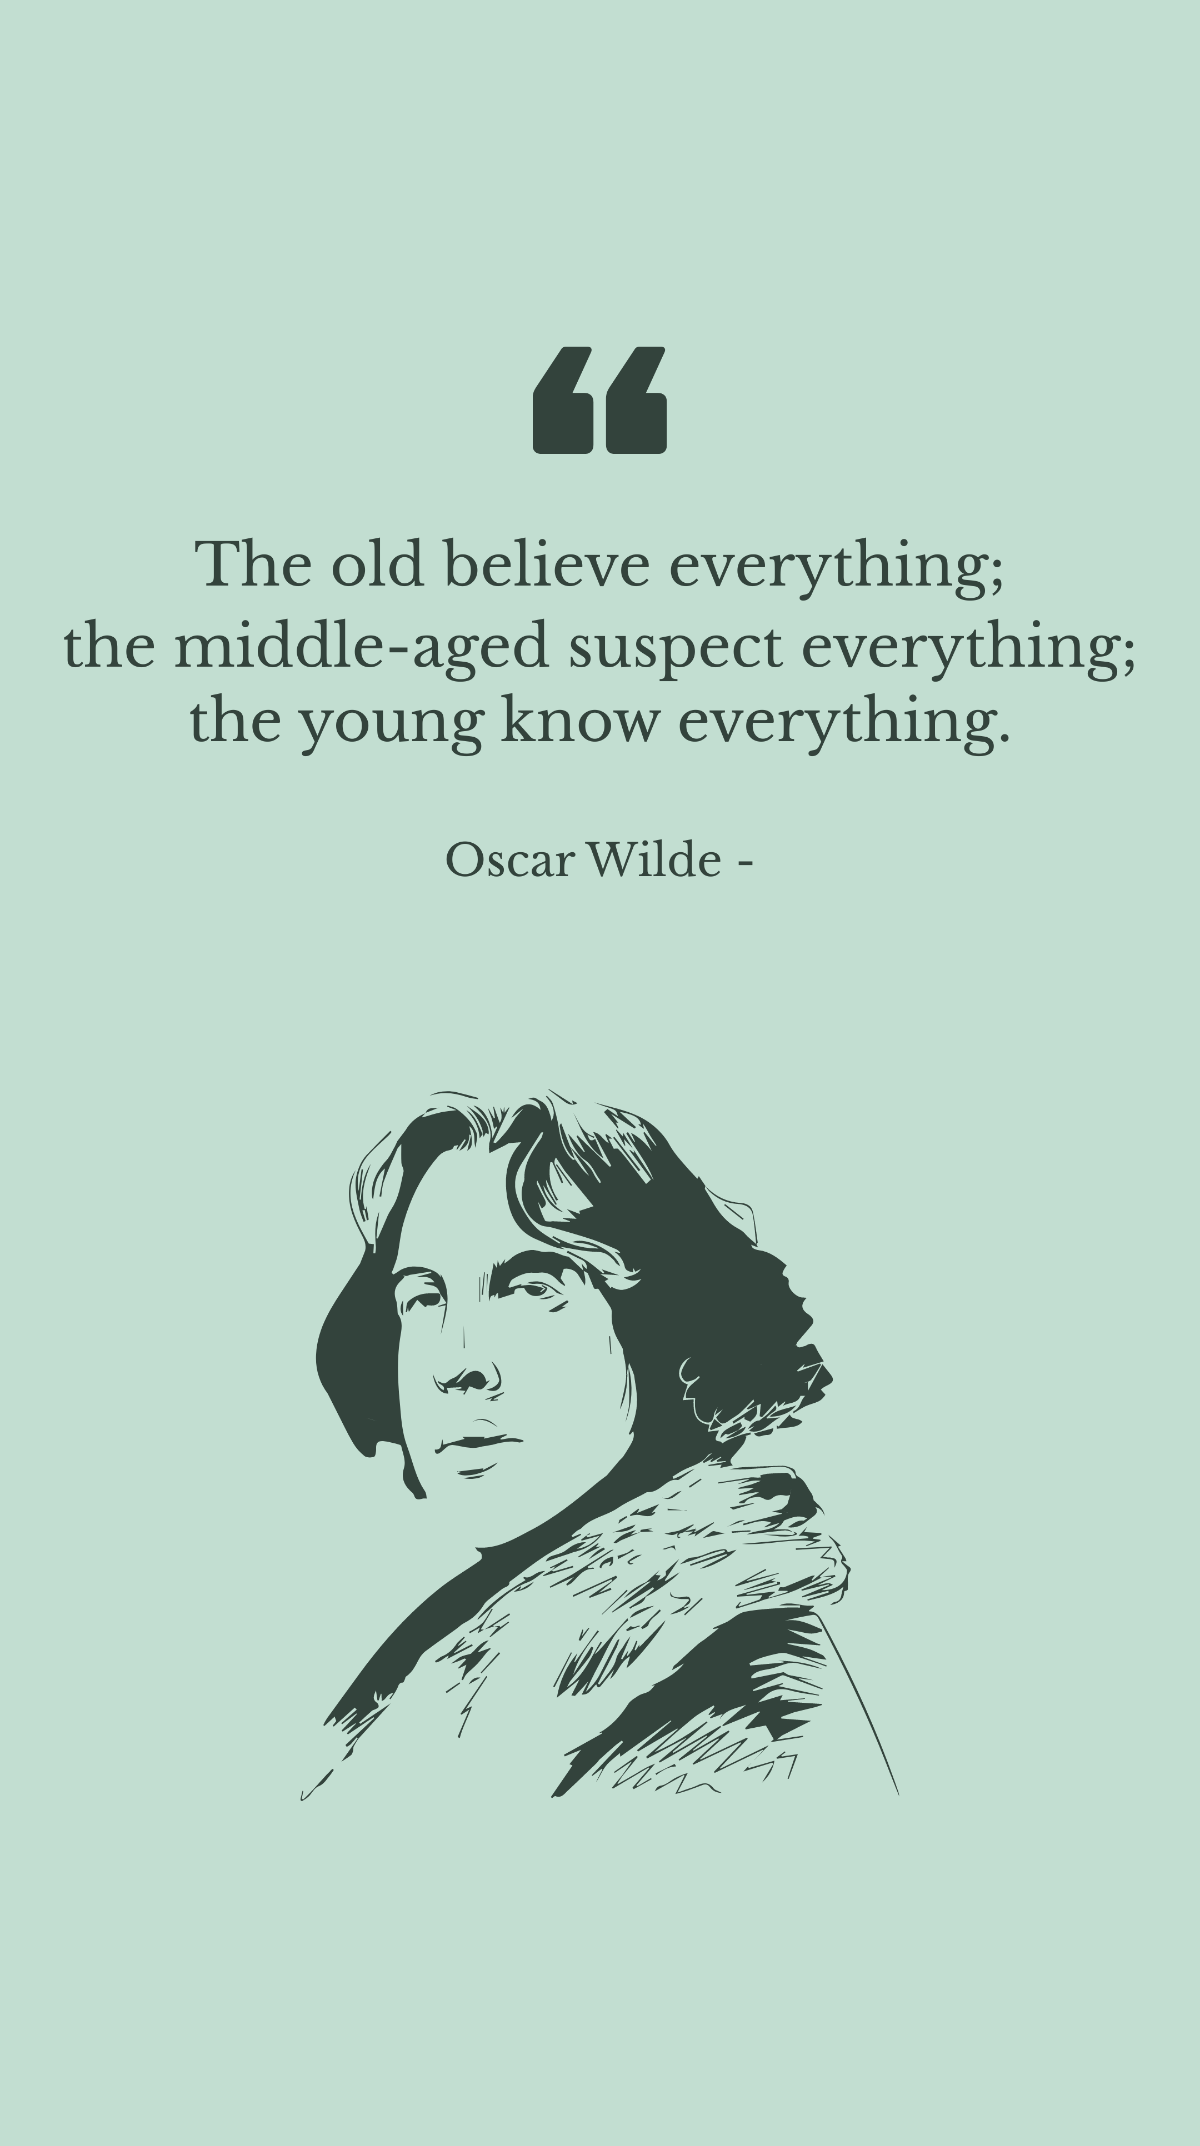 Oscar Wilde - The old believe everything; the middle-aged suspect everything; the young know everything. Template